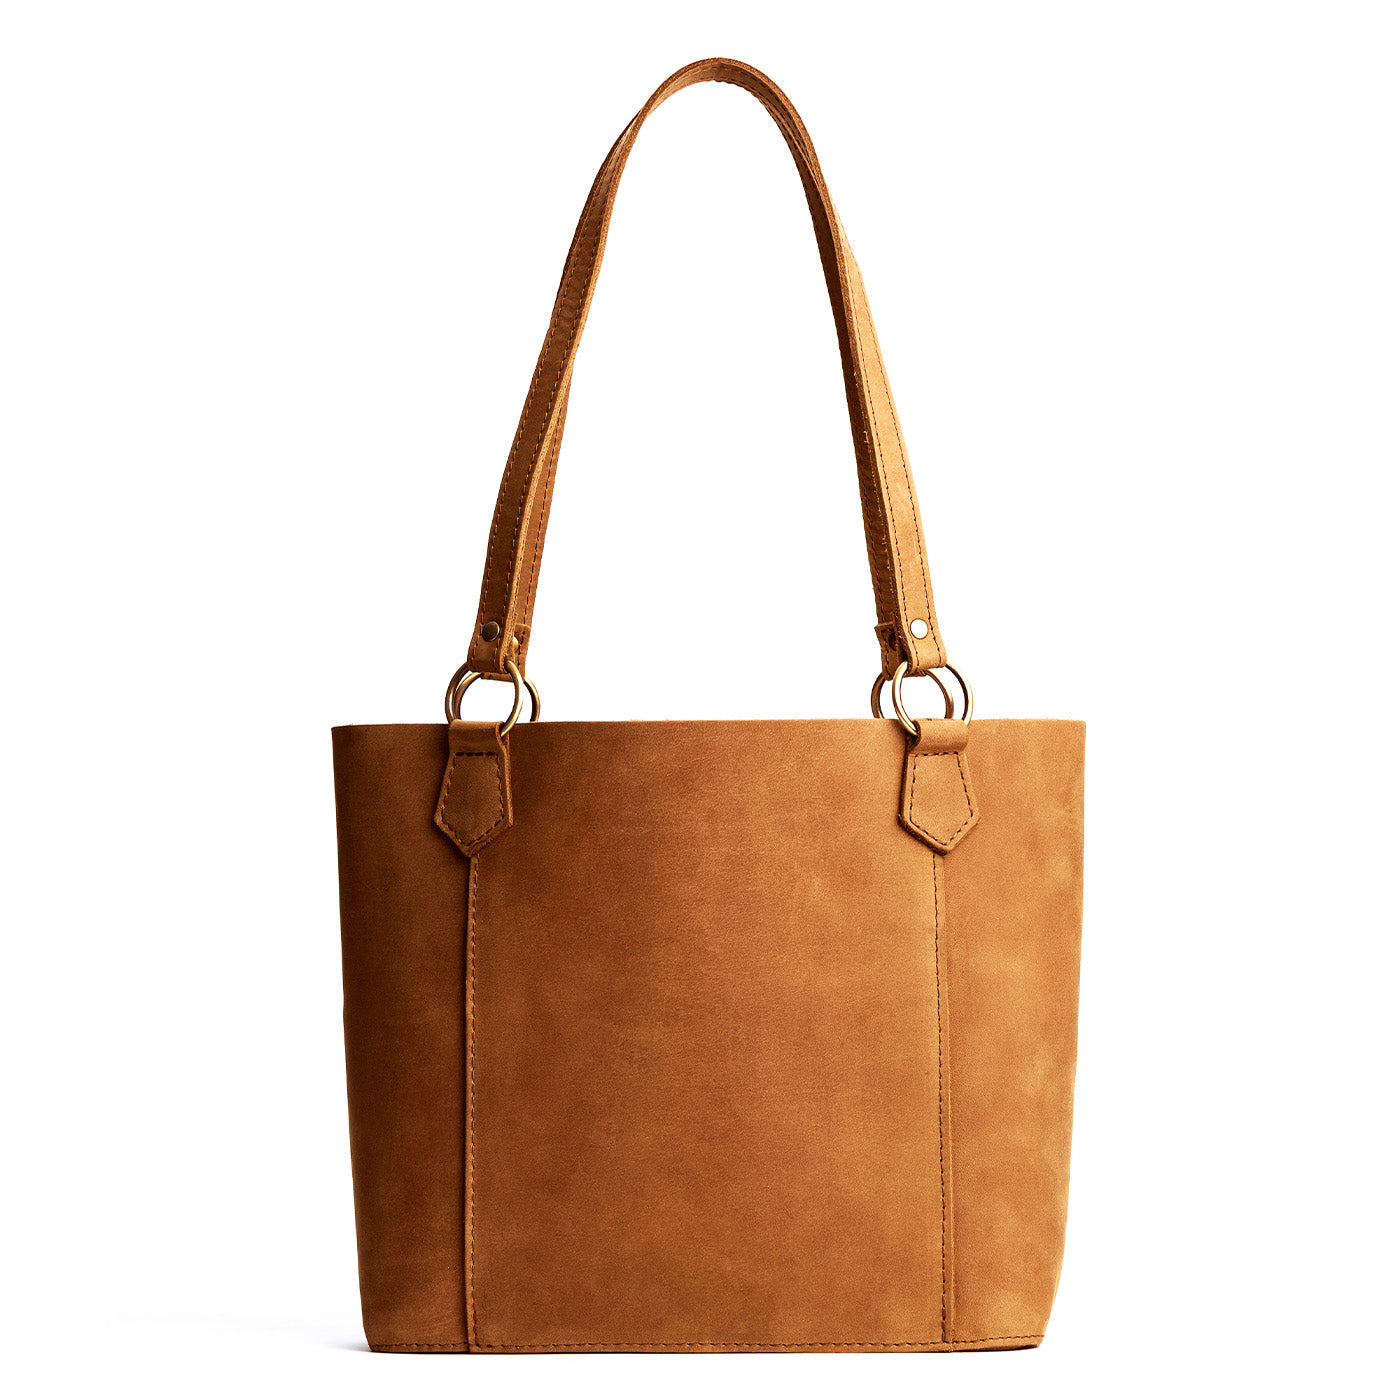 'Almost Perfect' The Market Tote